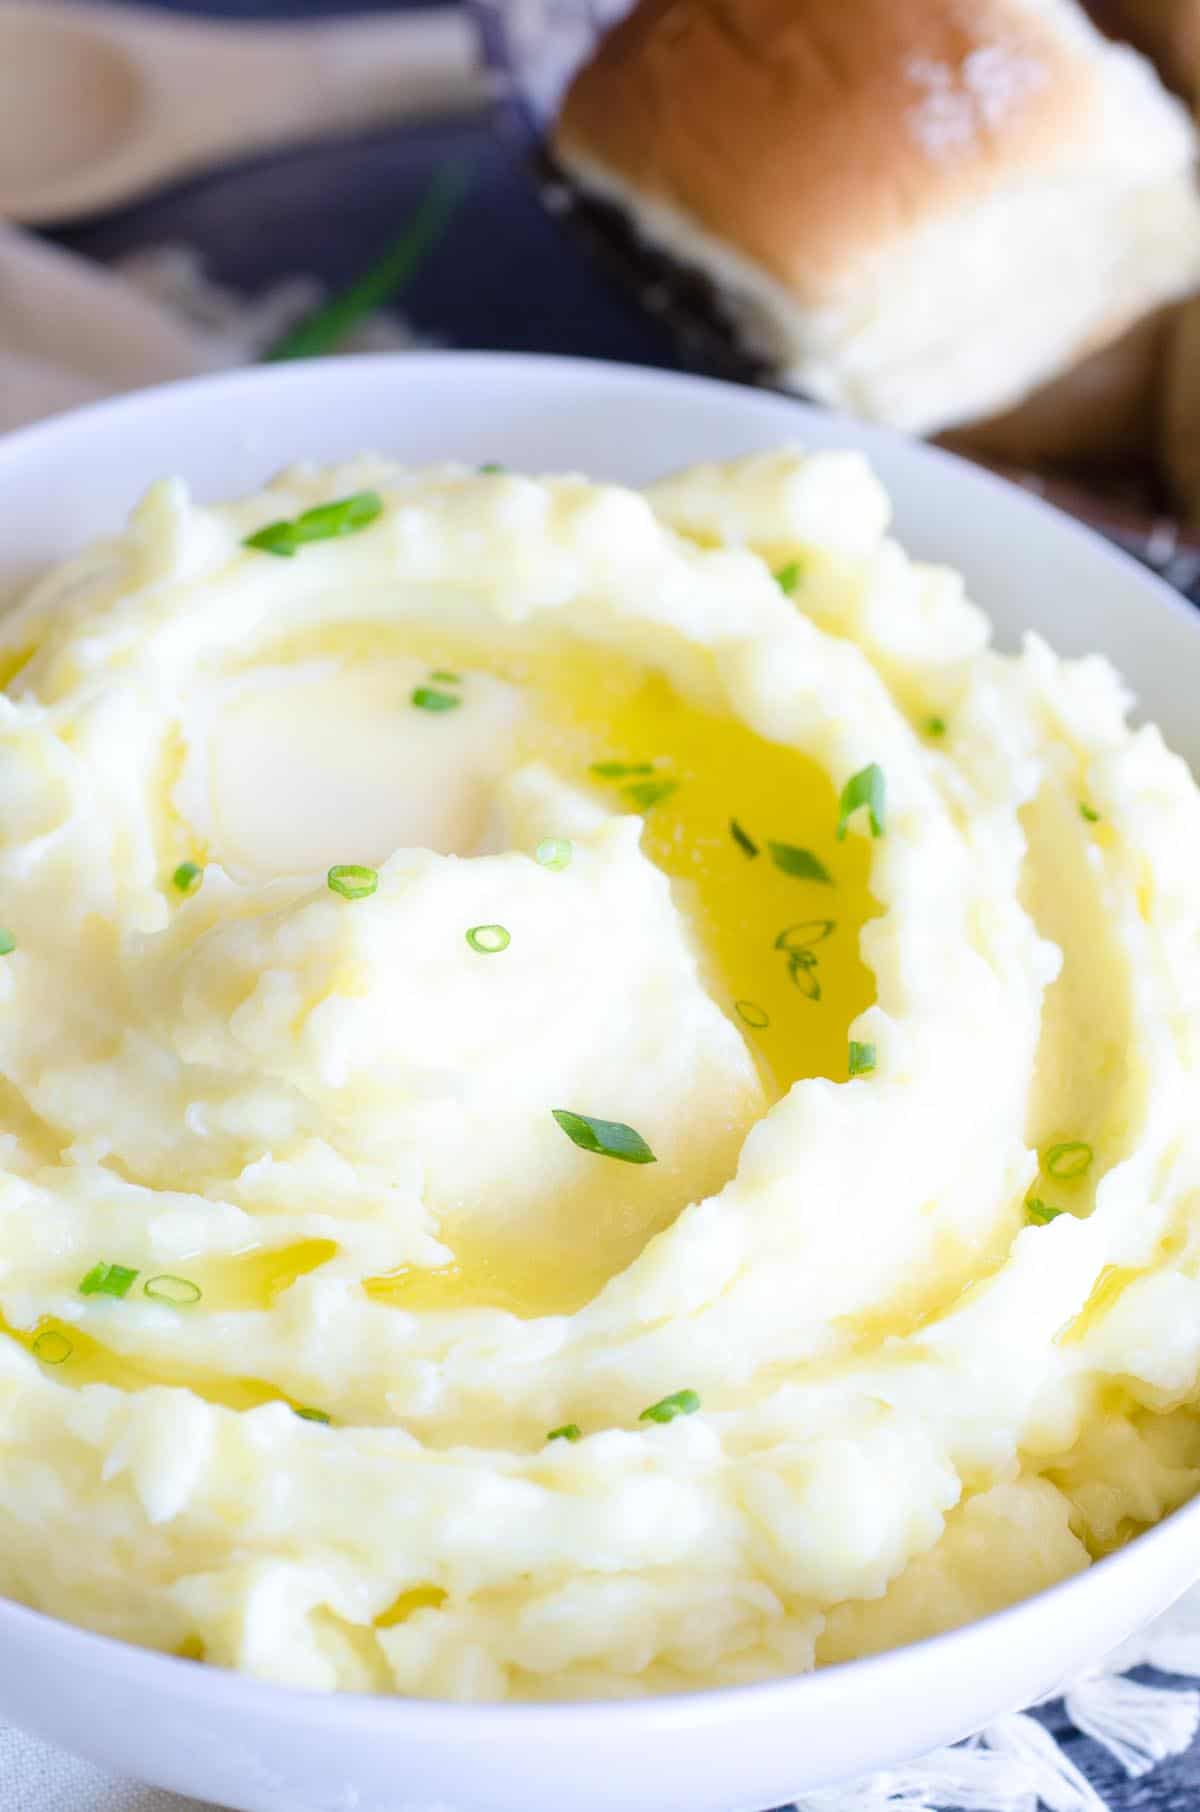 bowl of mashed potatoes with melted butter and chives on top